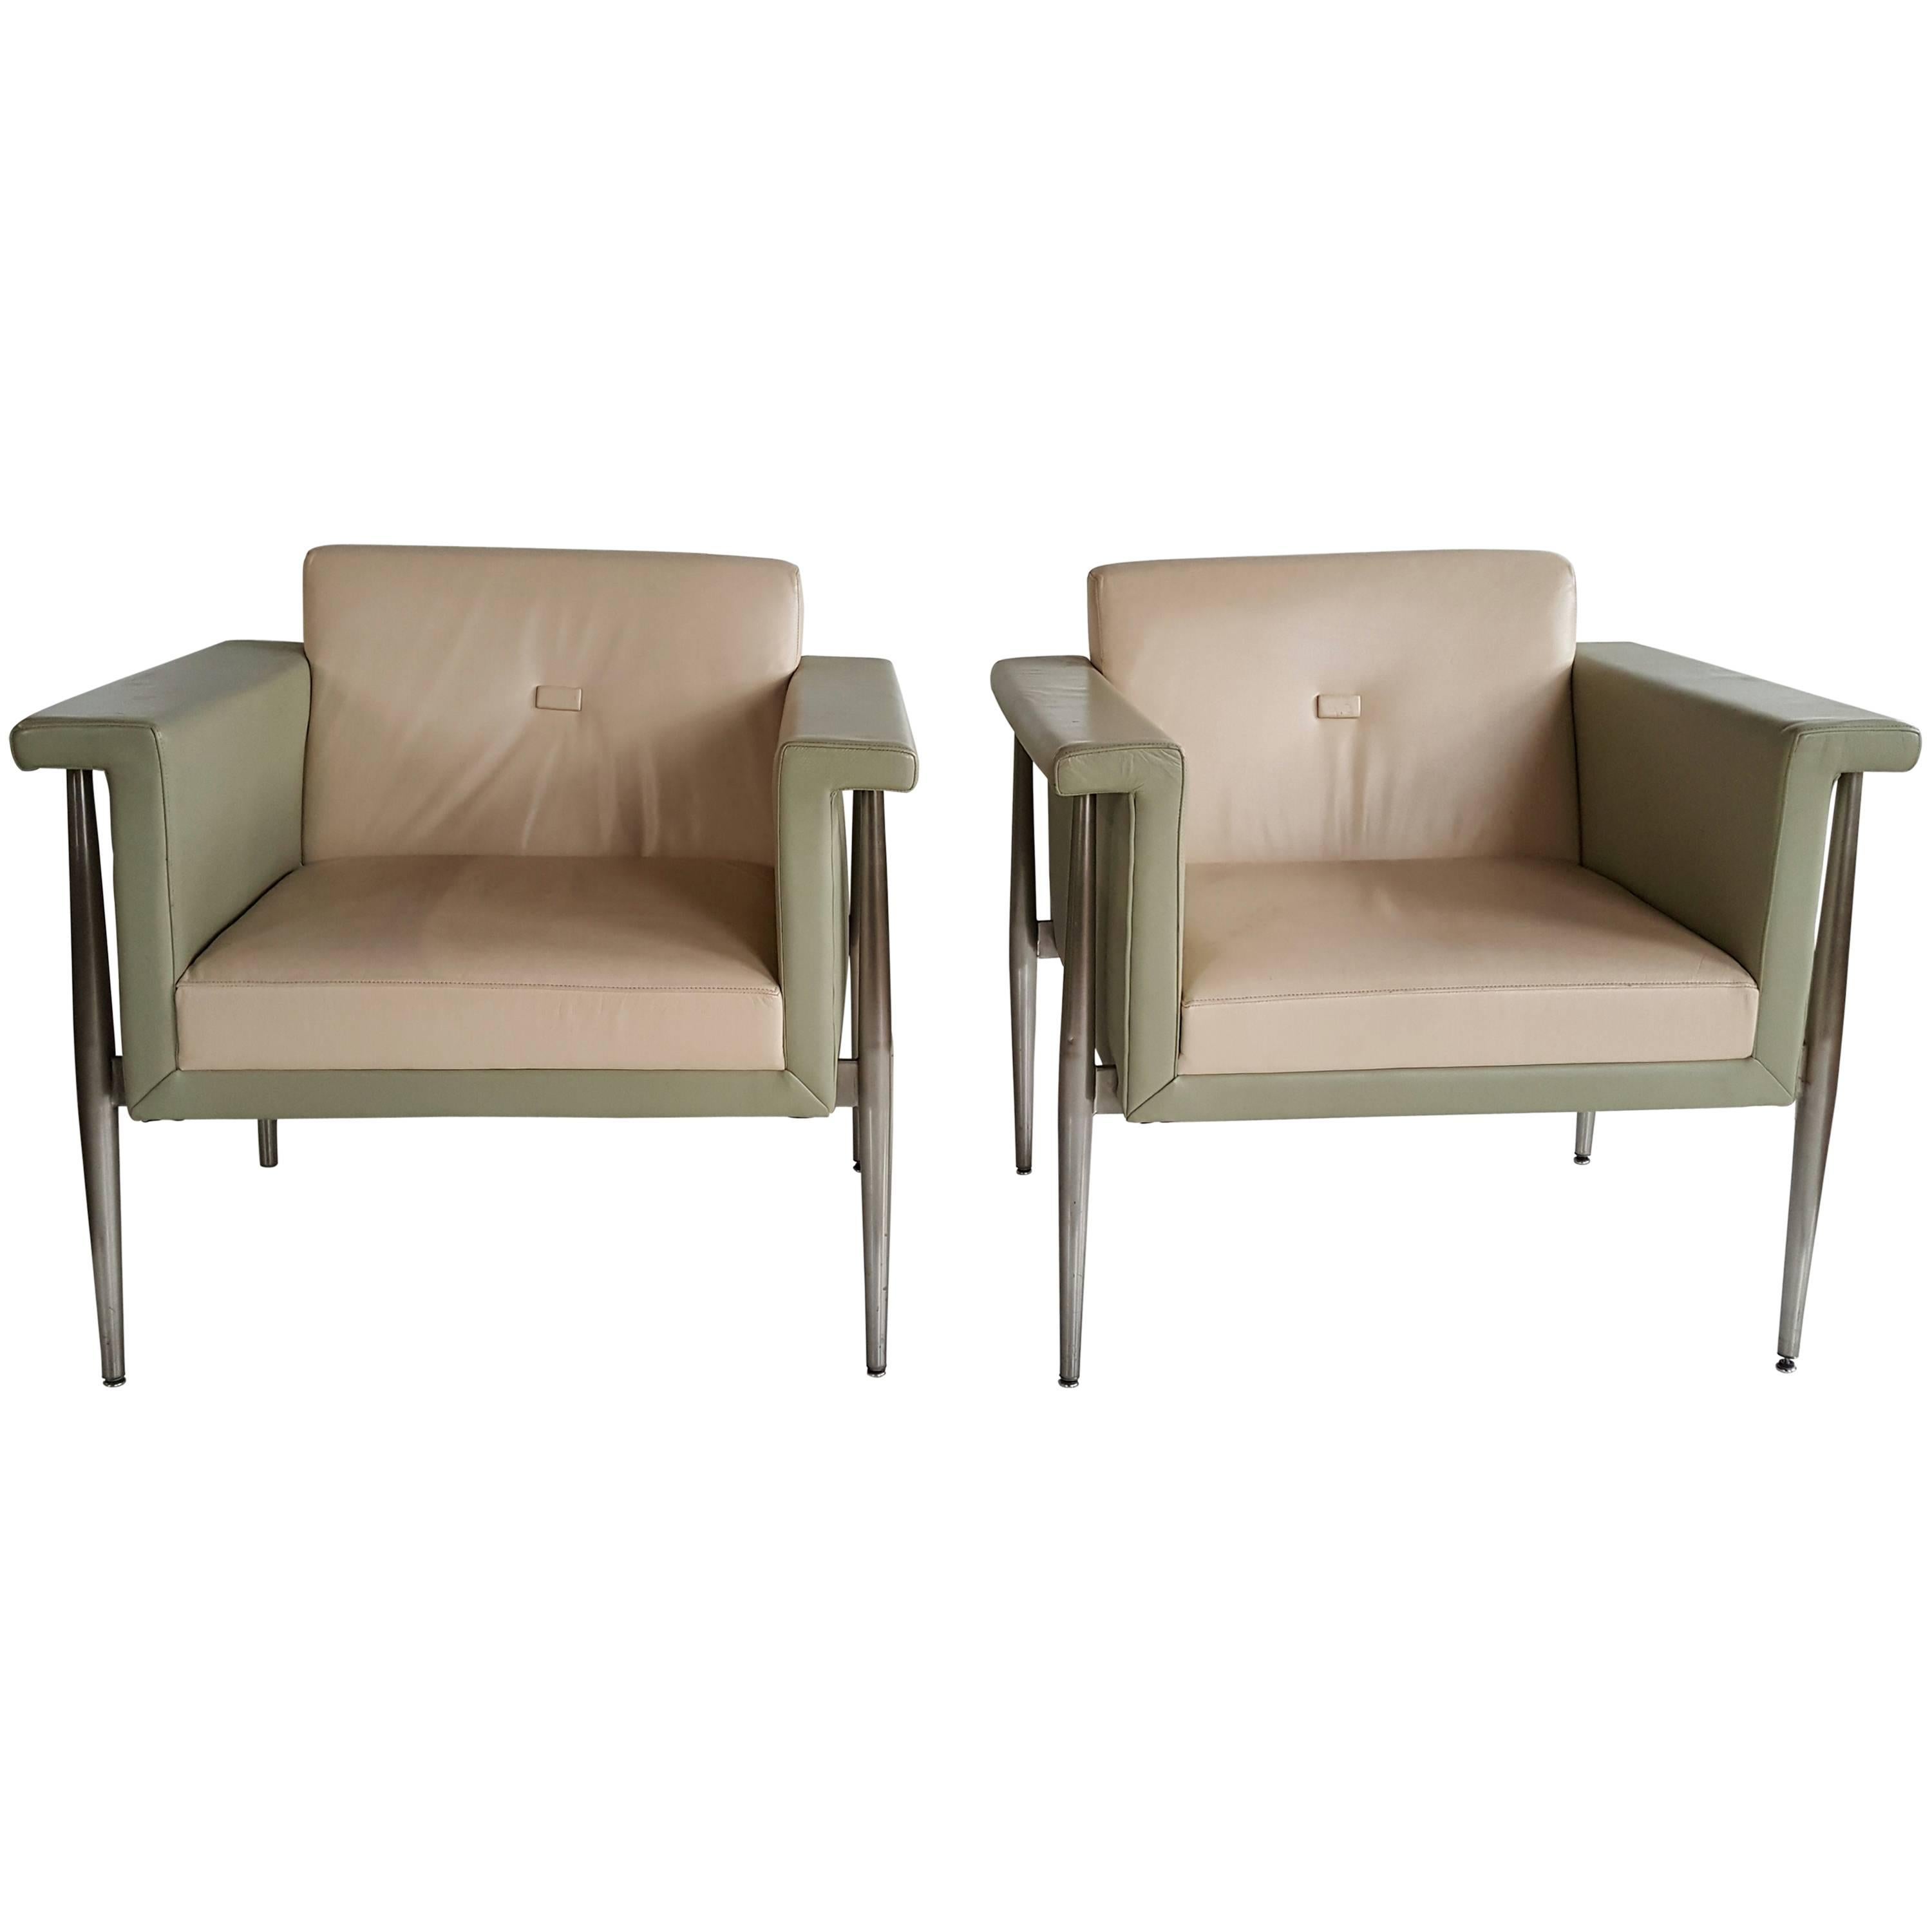 Memphis Style Two-Tone Leather and Aluminum Lounge Chairs, Bernhardt